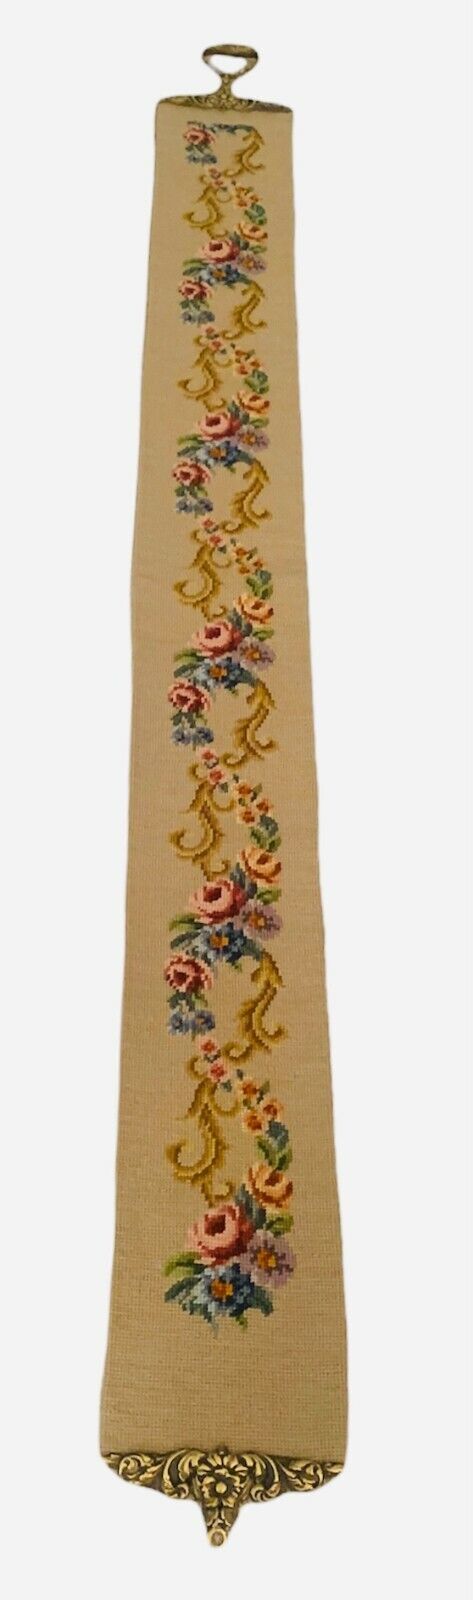 Vintage Wall Tapestry Bell Pull Brass Accents Floral Hanging Decor 68"x 6 1/2" 